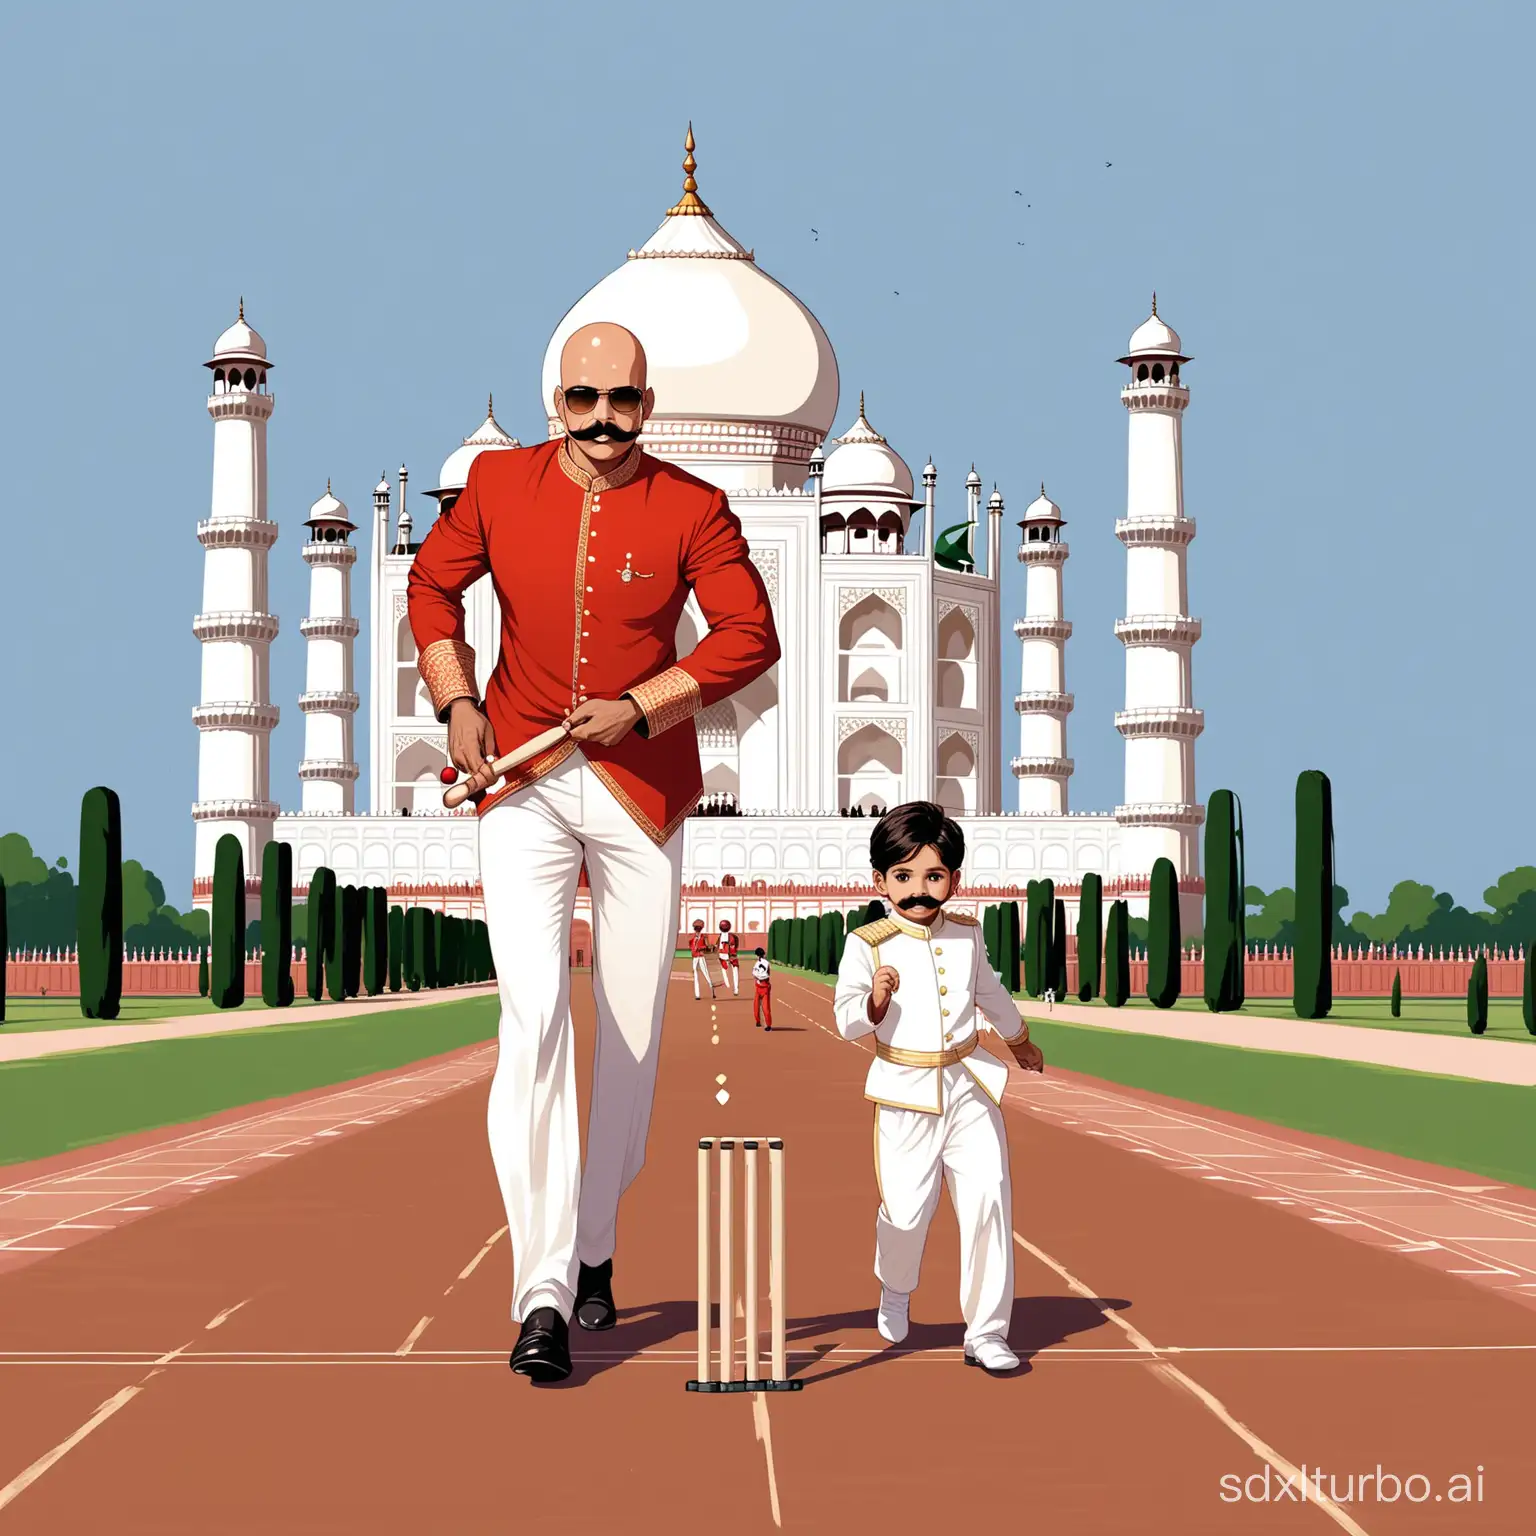 One Indian 40 year old king in royal attire bald but handsome with moustache with his little cute daughter also in royal Knight Rider dress playing cricket in front of the Taj Mahal